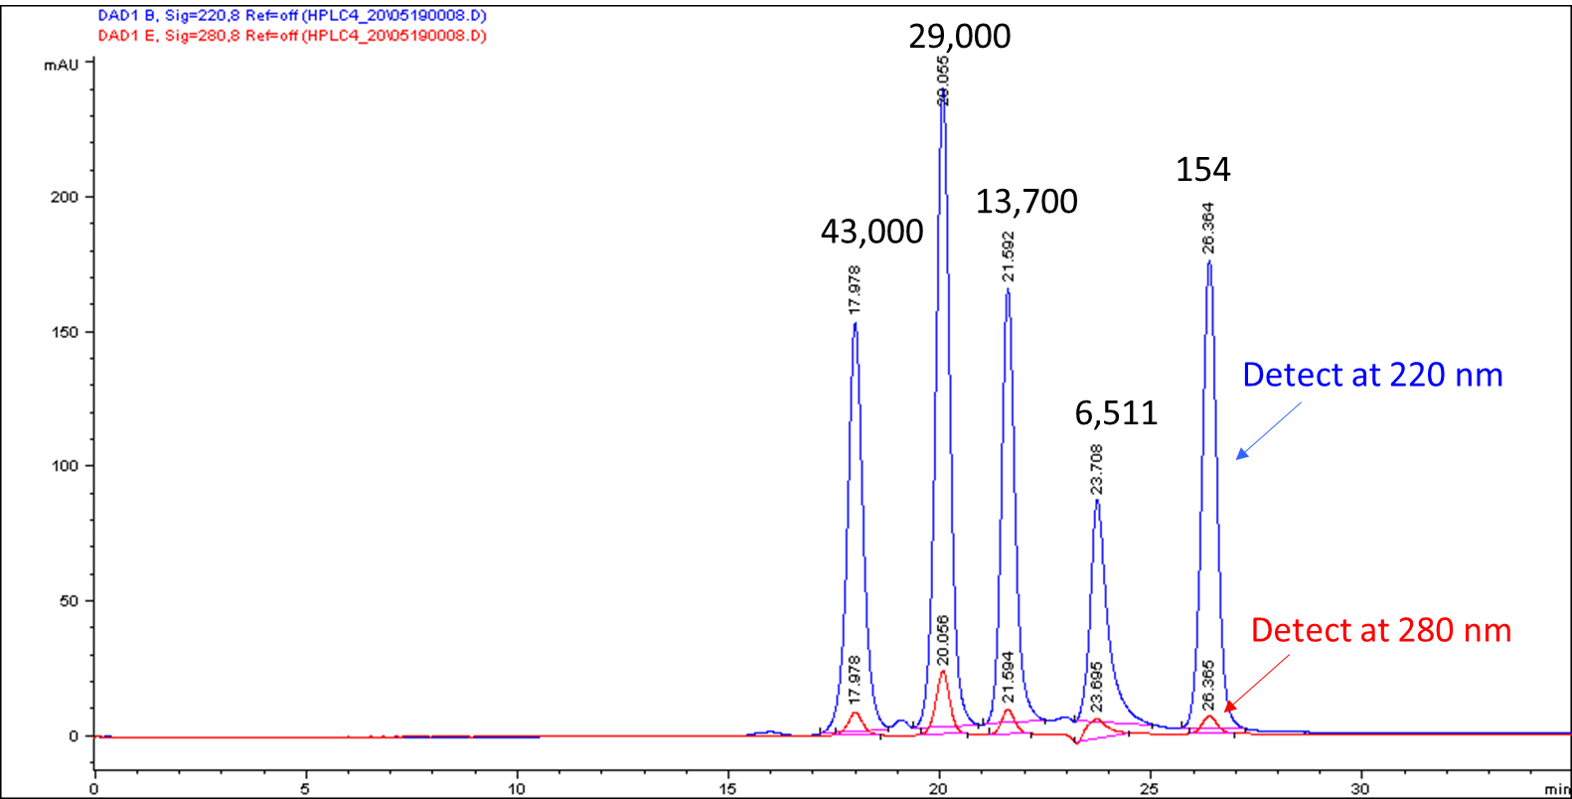  SEC HPLC profile of protein standards in a TSKgel BioAssist G300SWxl (7.8 mm x 30 cm, 5 µm, Part No. 08541). HPLC condition: isocratic PBS buffer at 0.5 mL/min. Instrument: Agilent 1100 HPLC series. 